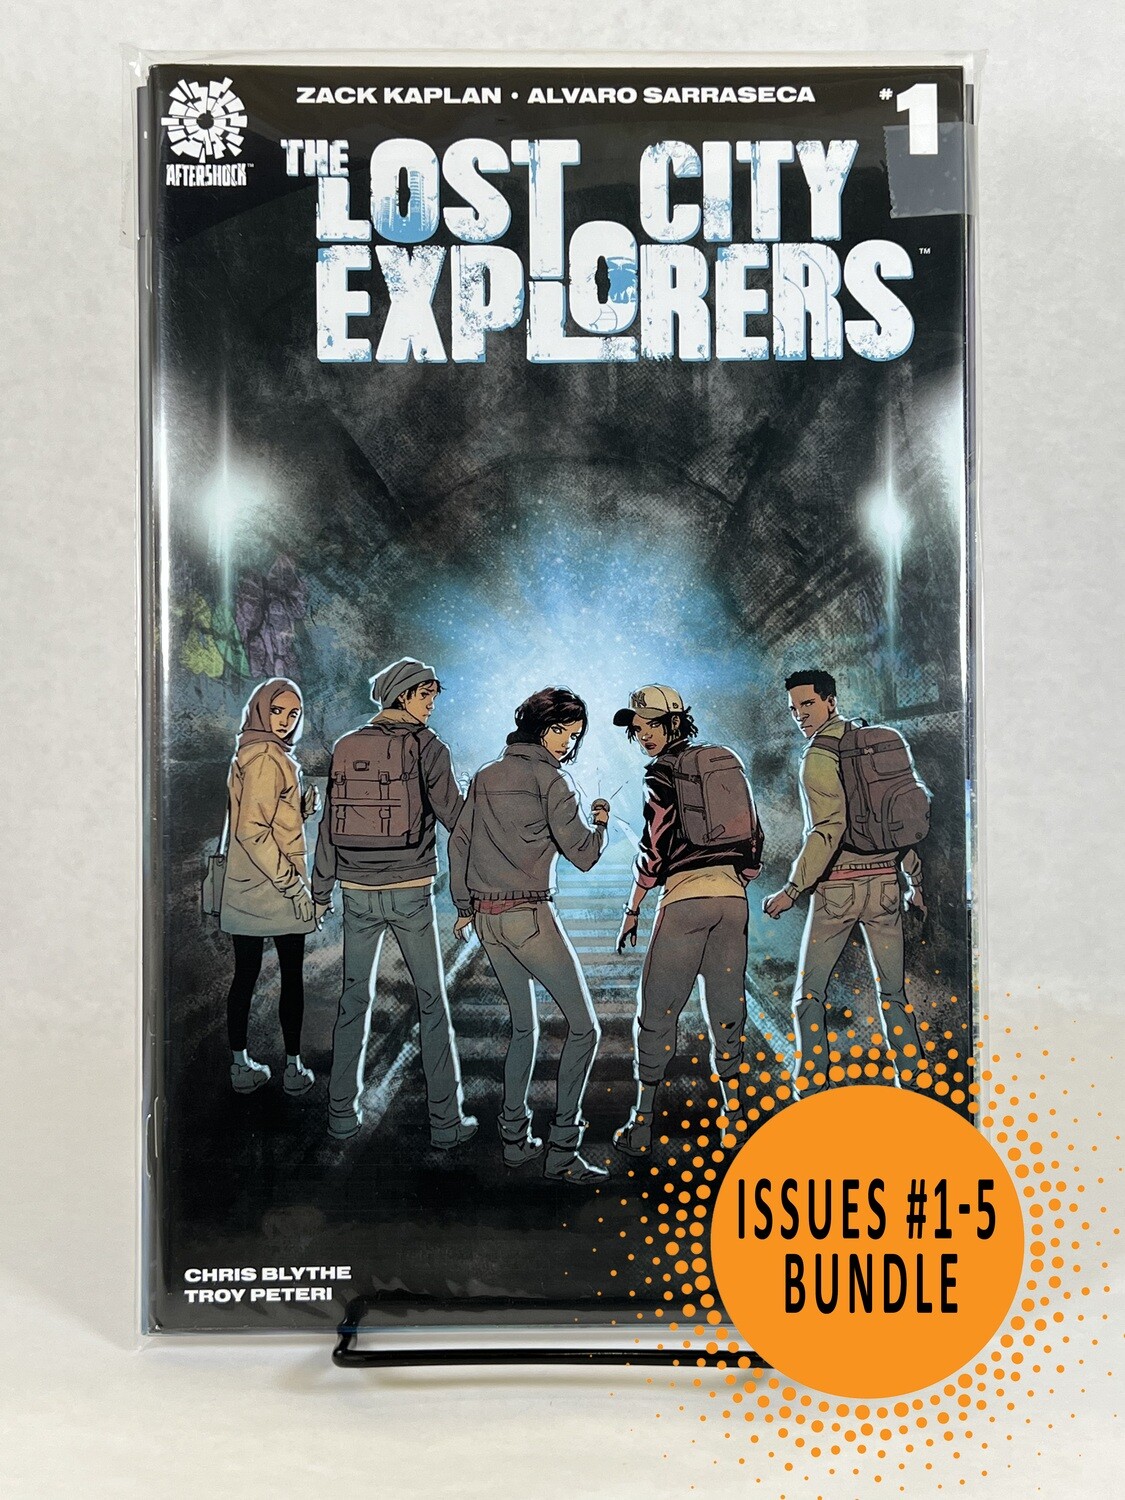 The Lost City Explorers Issues #1-5 Bundle